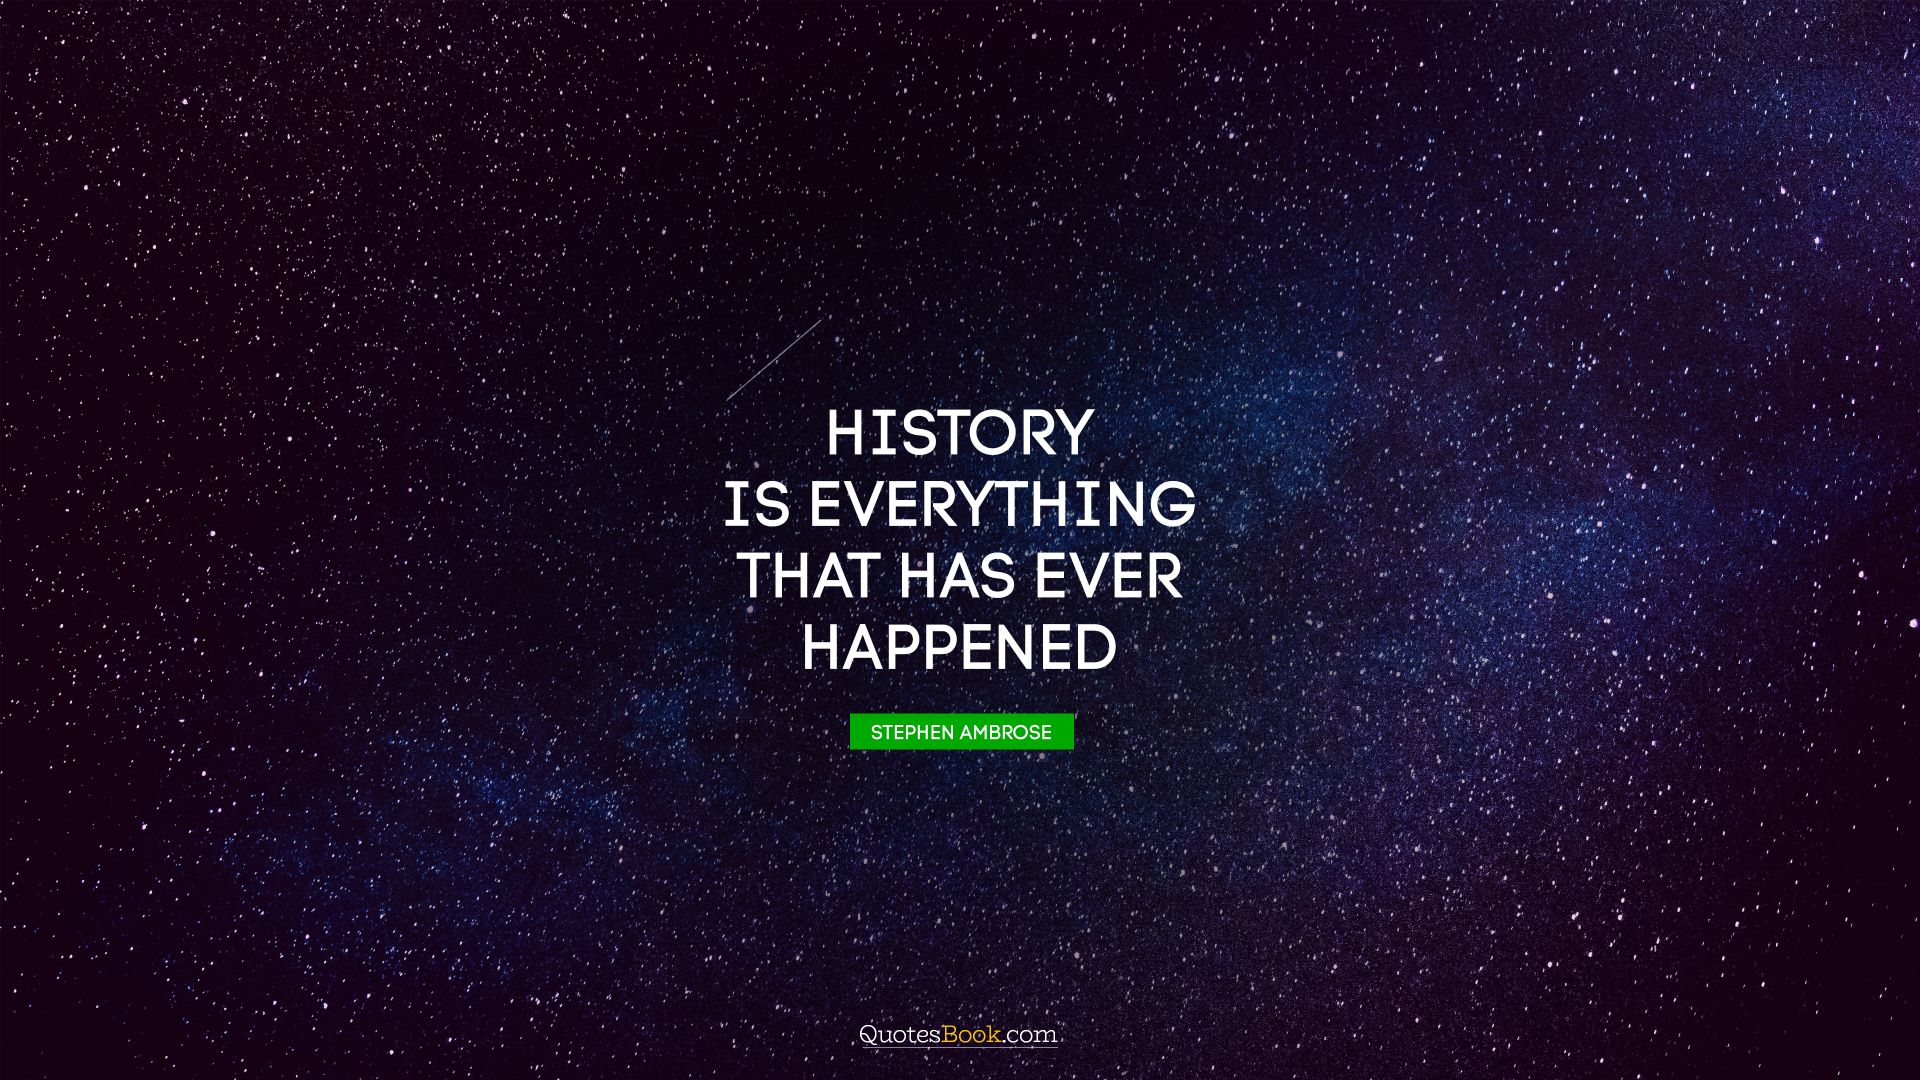 History is everything that has ever happened. - Quote by Stephen Ambrose